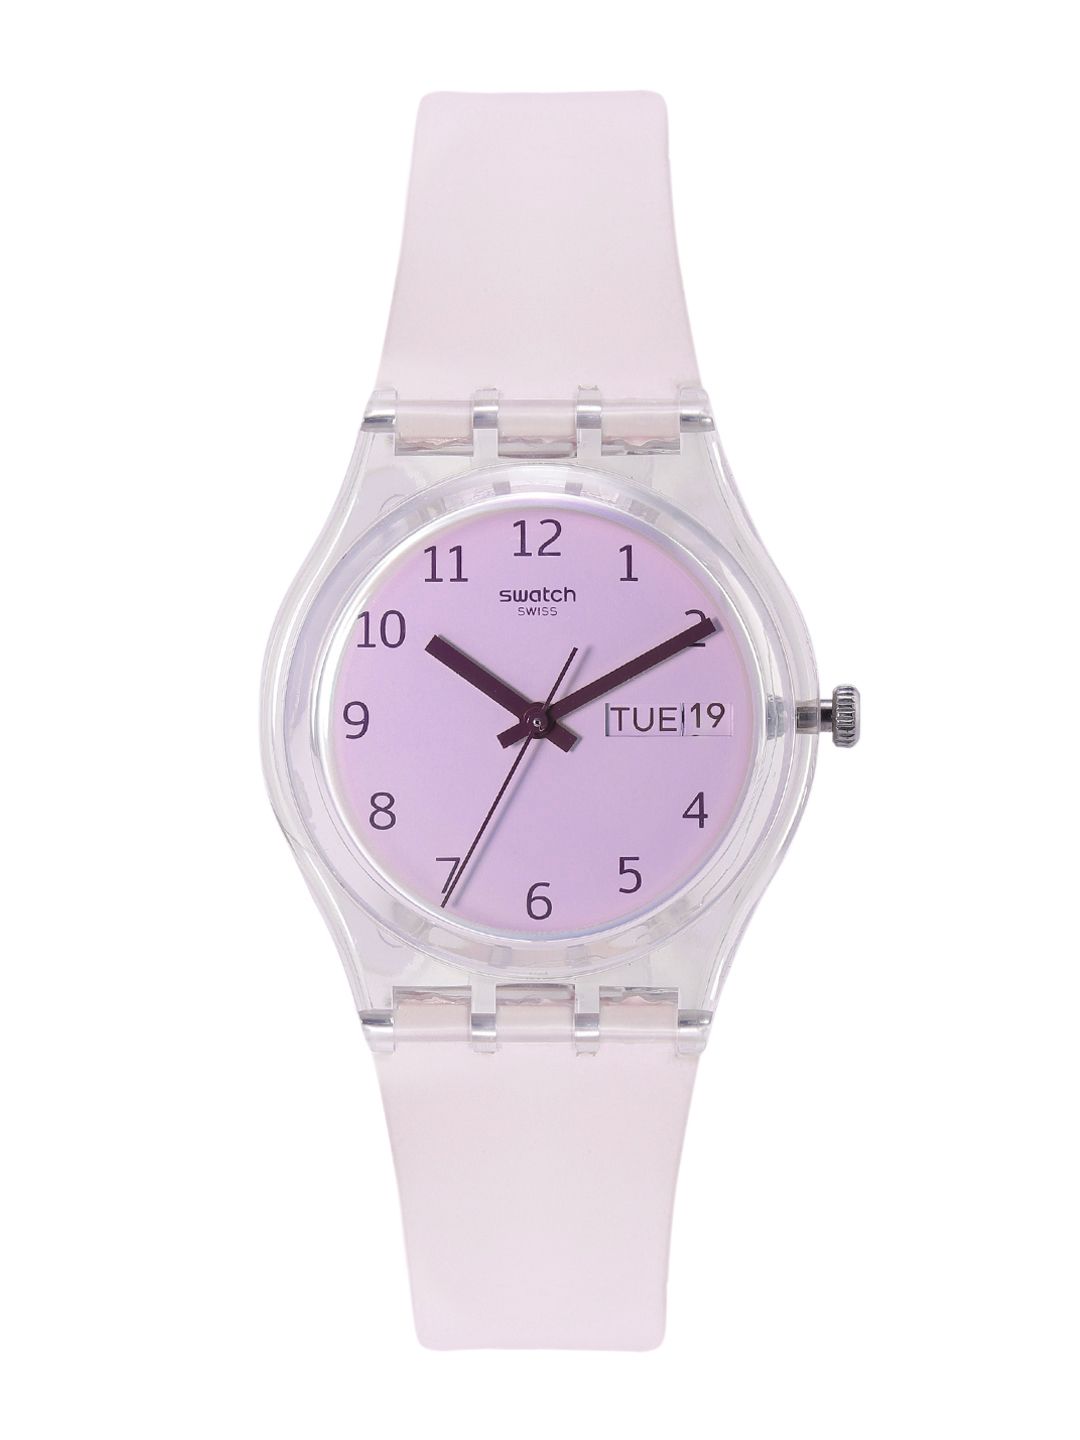 Swatch Unisex Pink Water Resistant Analogue Watch Price in India